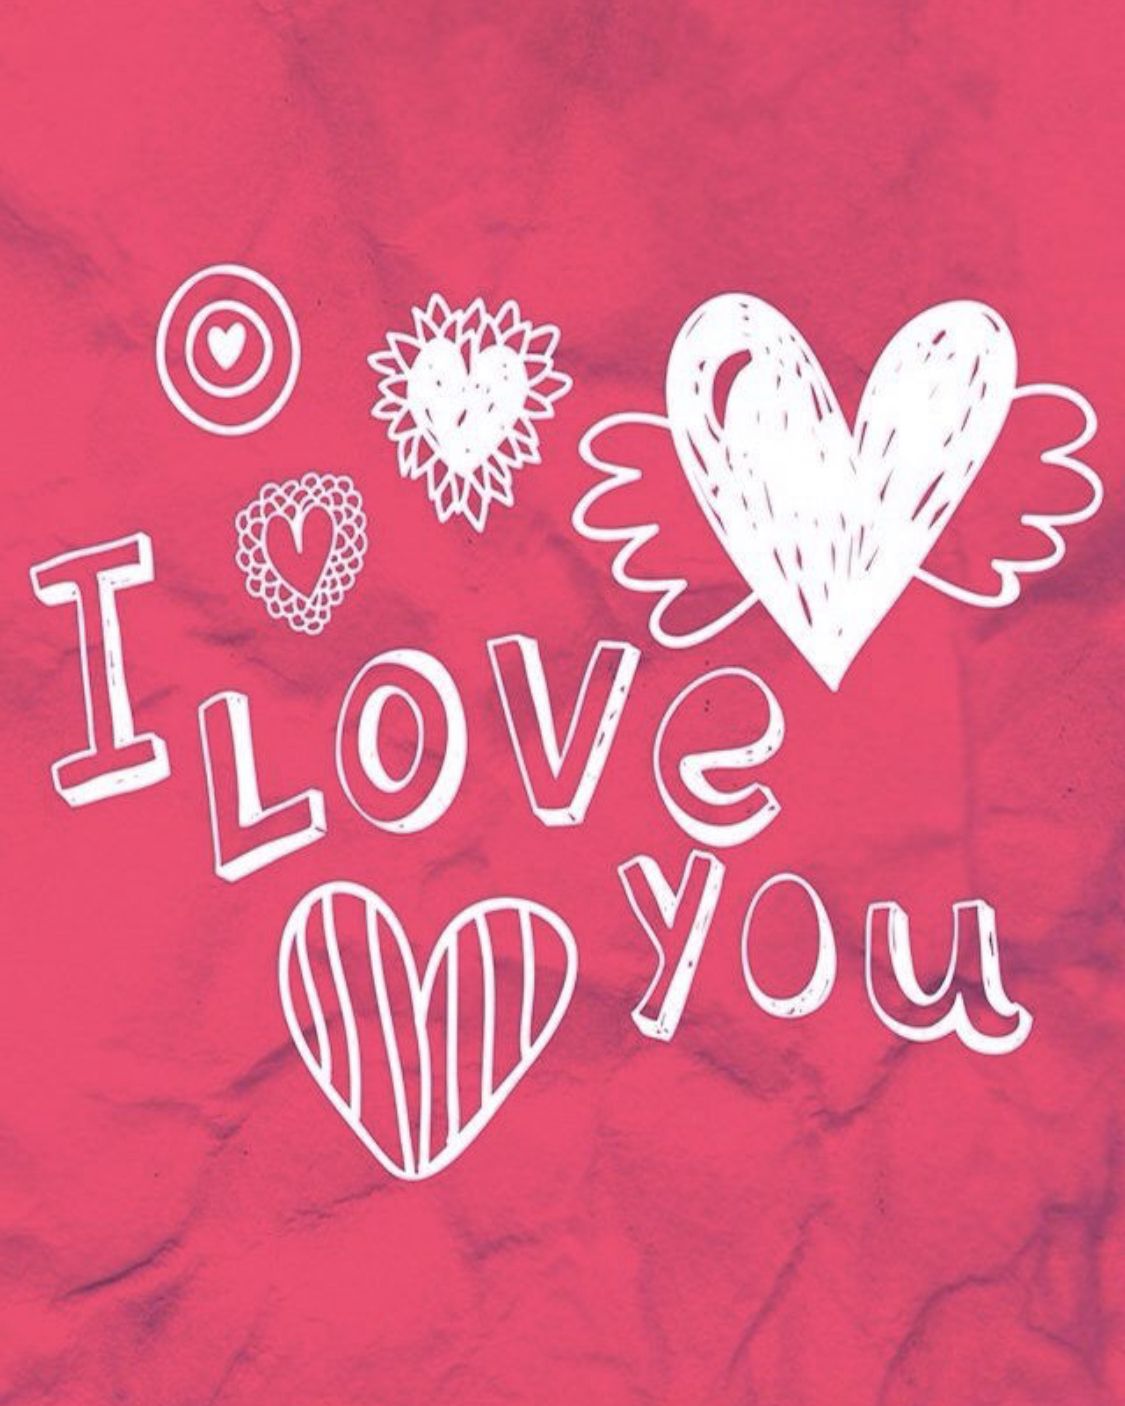 I Love You Heart Wallpaper, Wallpaper For Your Phone, - Love Vector Free , HD Wallpaper & Backgrounds